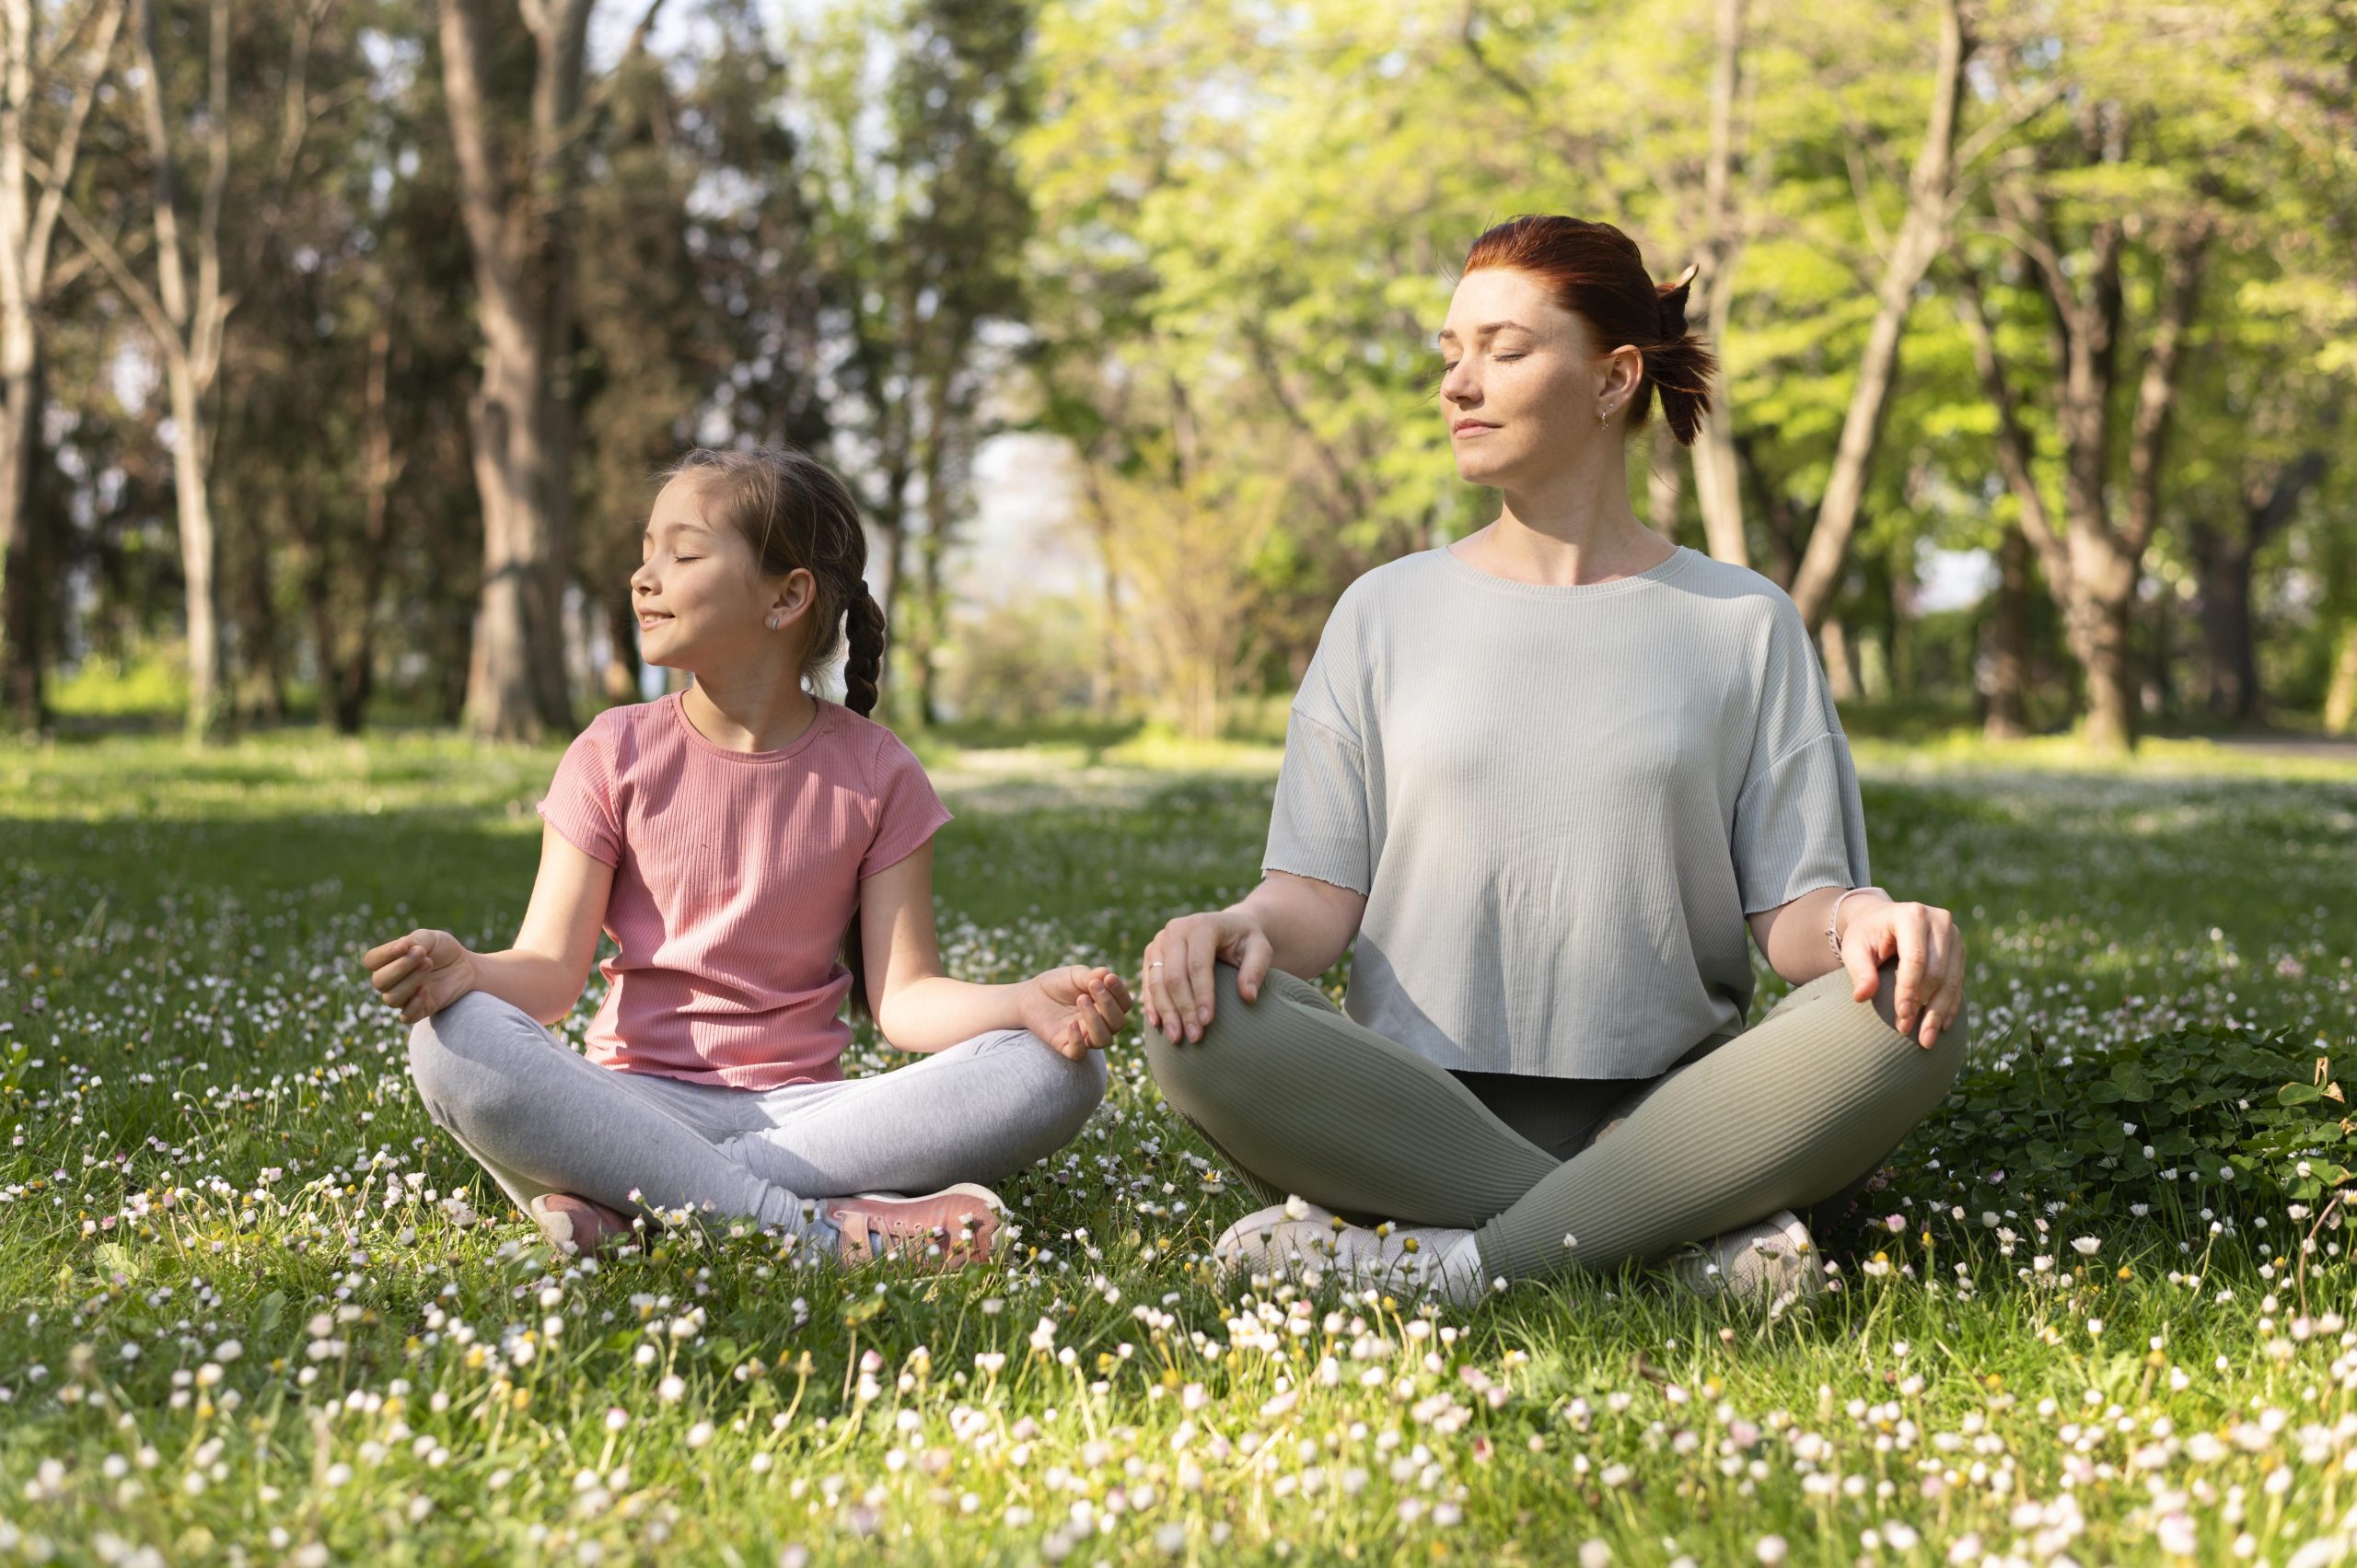 Woman and young girl practicing yoga together peacefully on a grassy field with trees. 